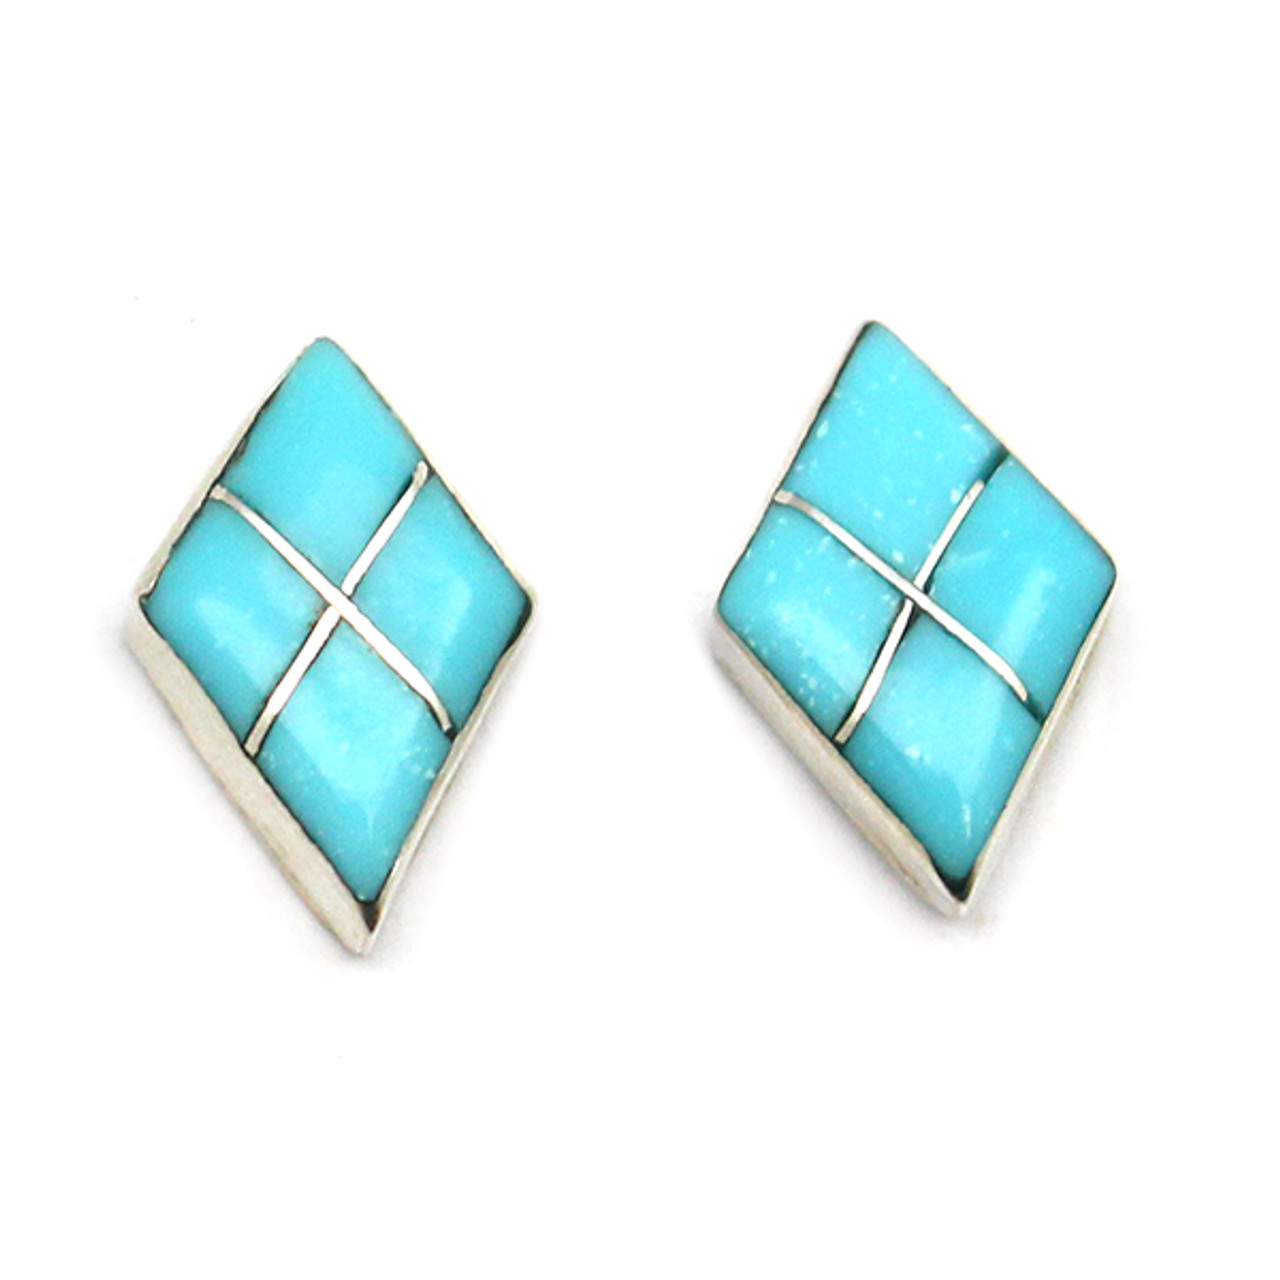 Sterling Silver Diamond Shaped Turquoise Earrings